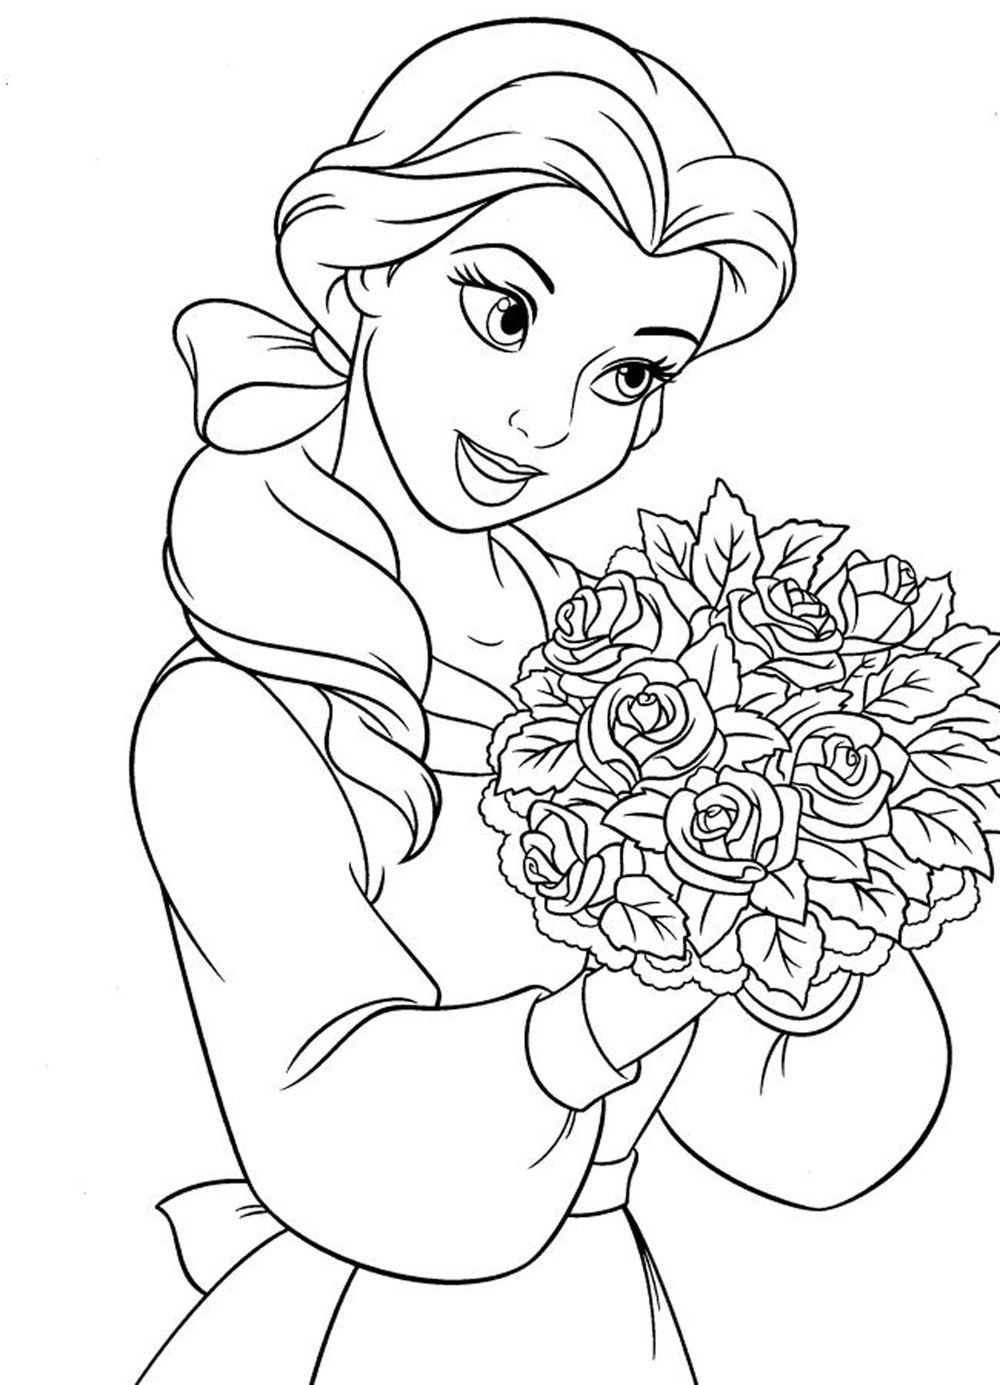 Coloring Pages Disney For Girls
 princess coloring pages for girls Free